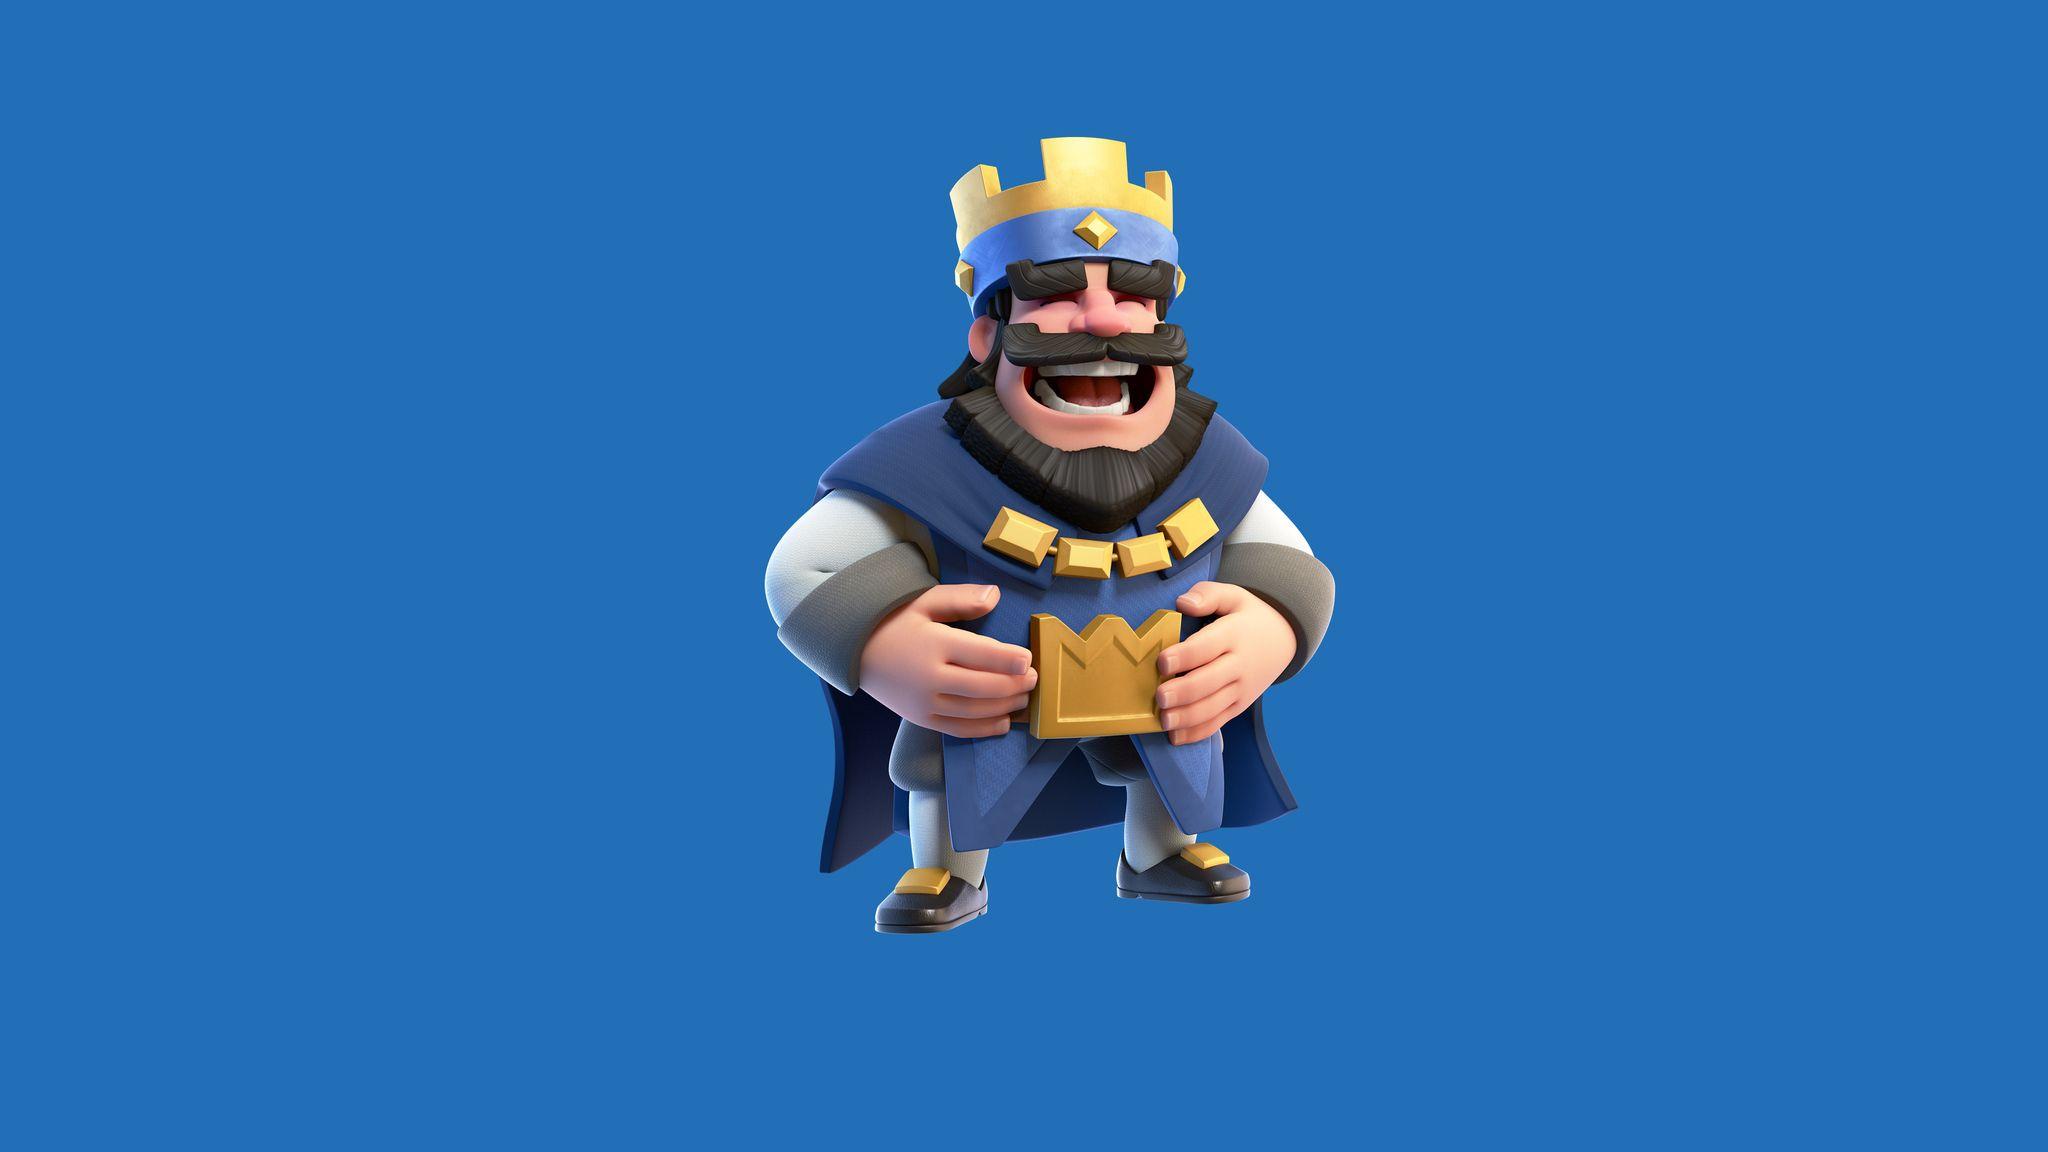 Download Clash Royale Supercell Game HD Wallpapers In 2048x1152